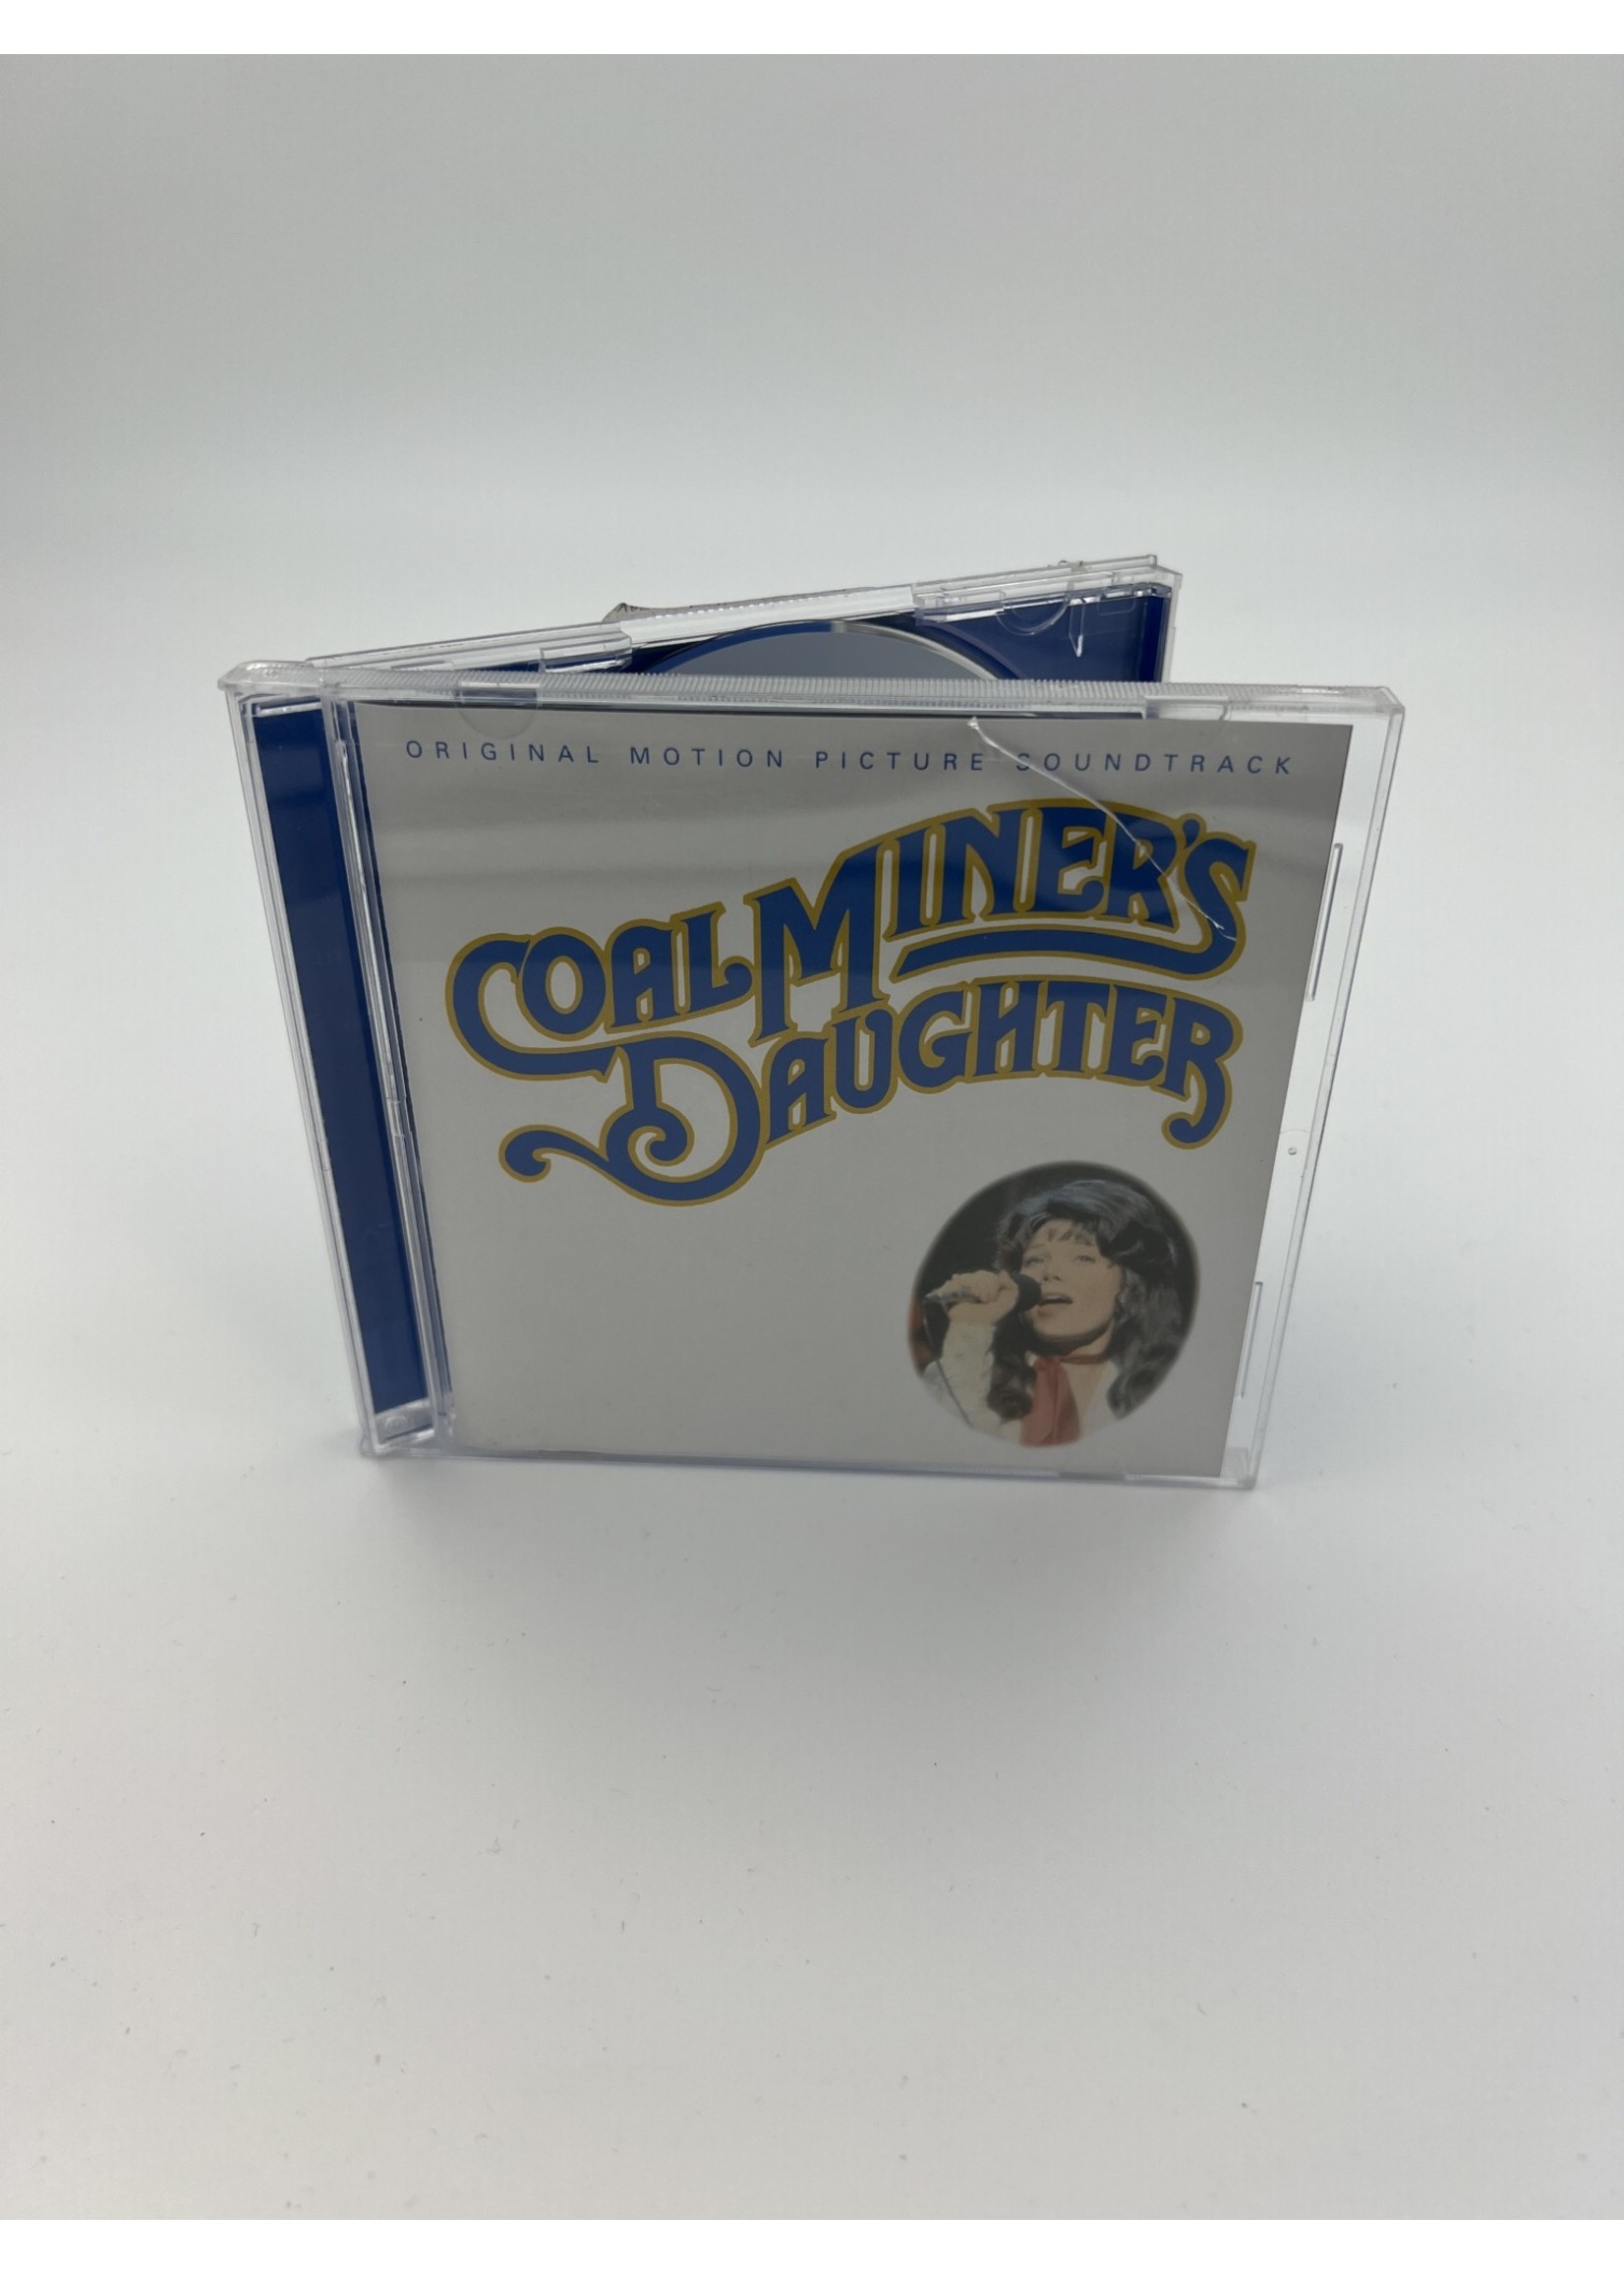 CD Coal Miners Daughter Motion Picture Soundtrack Cd